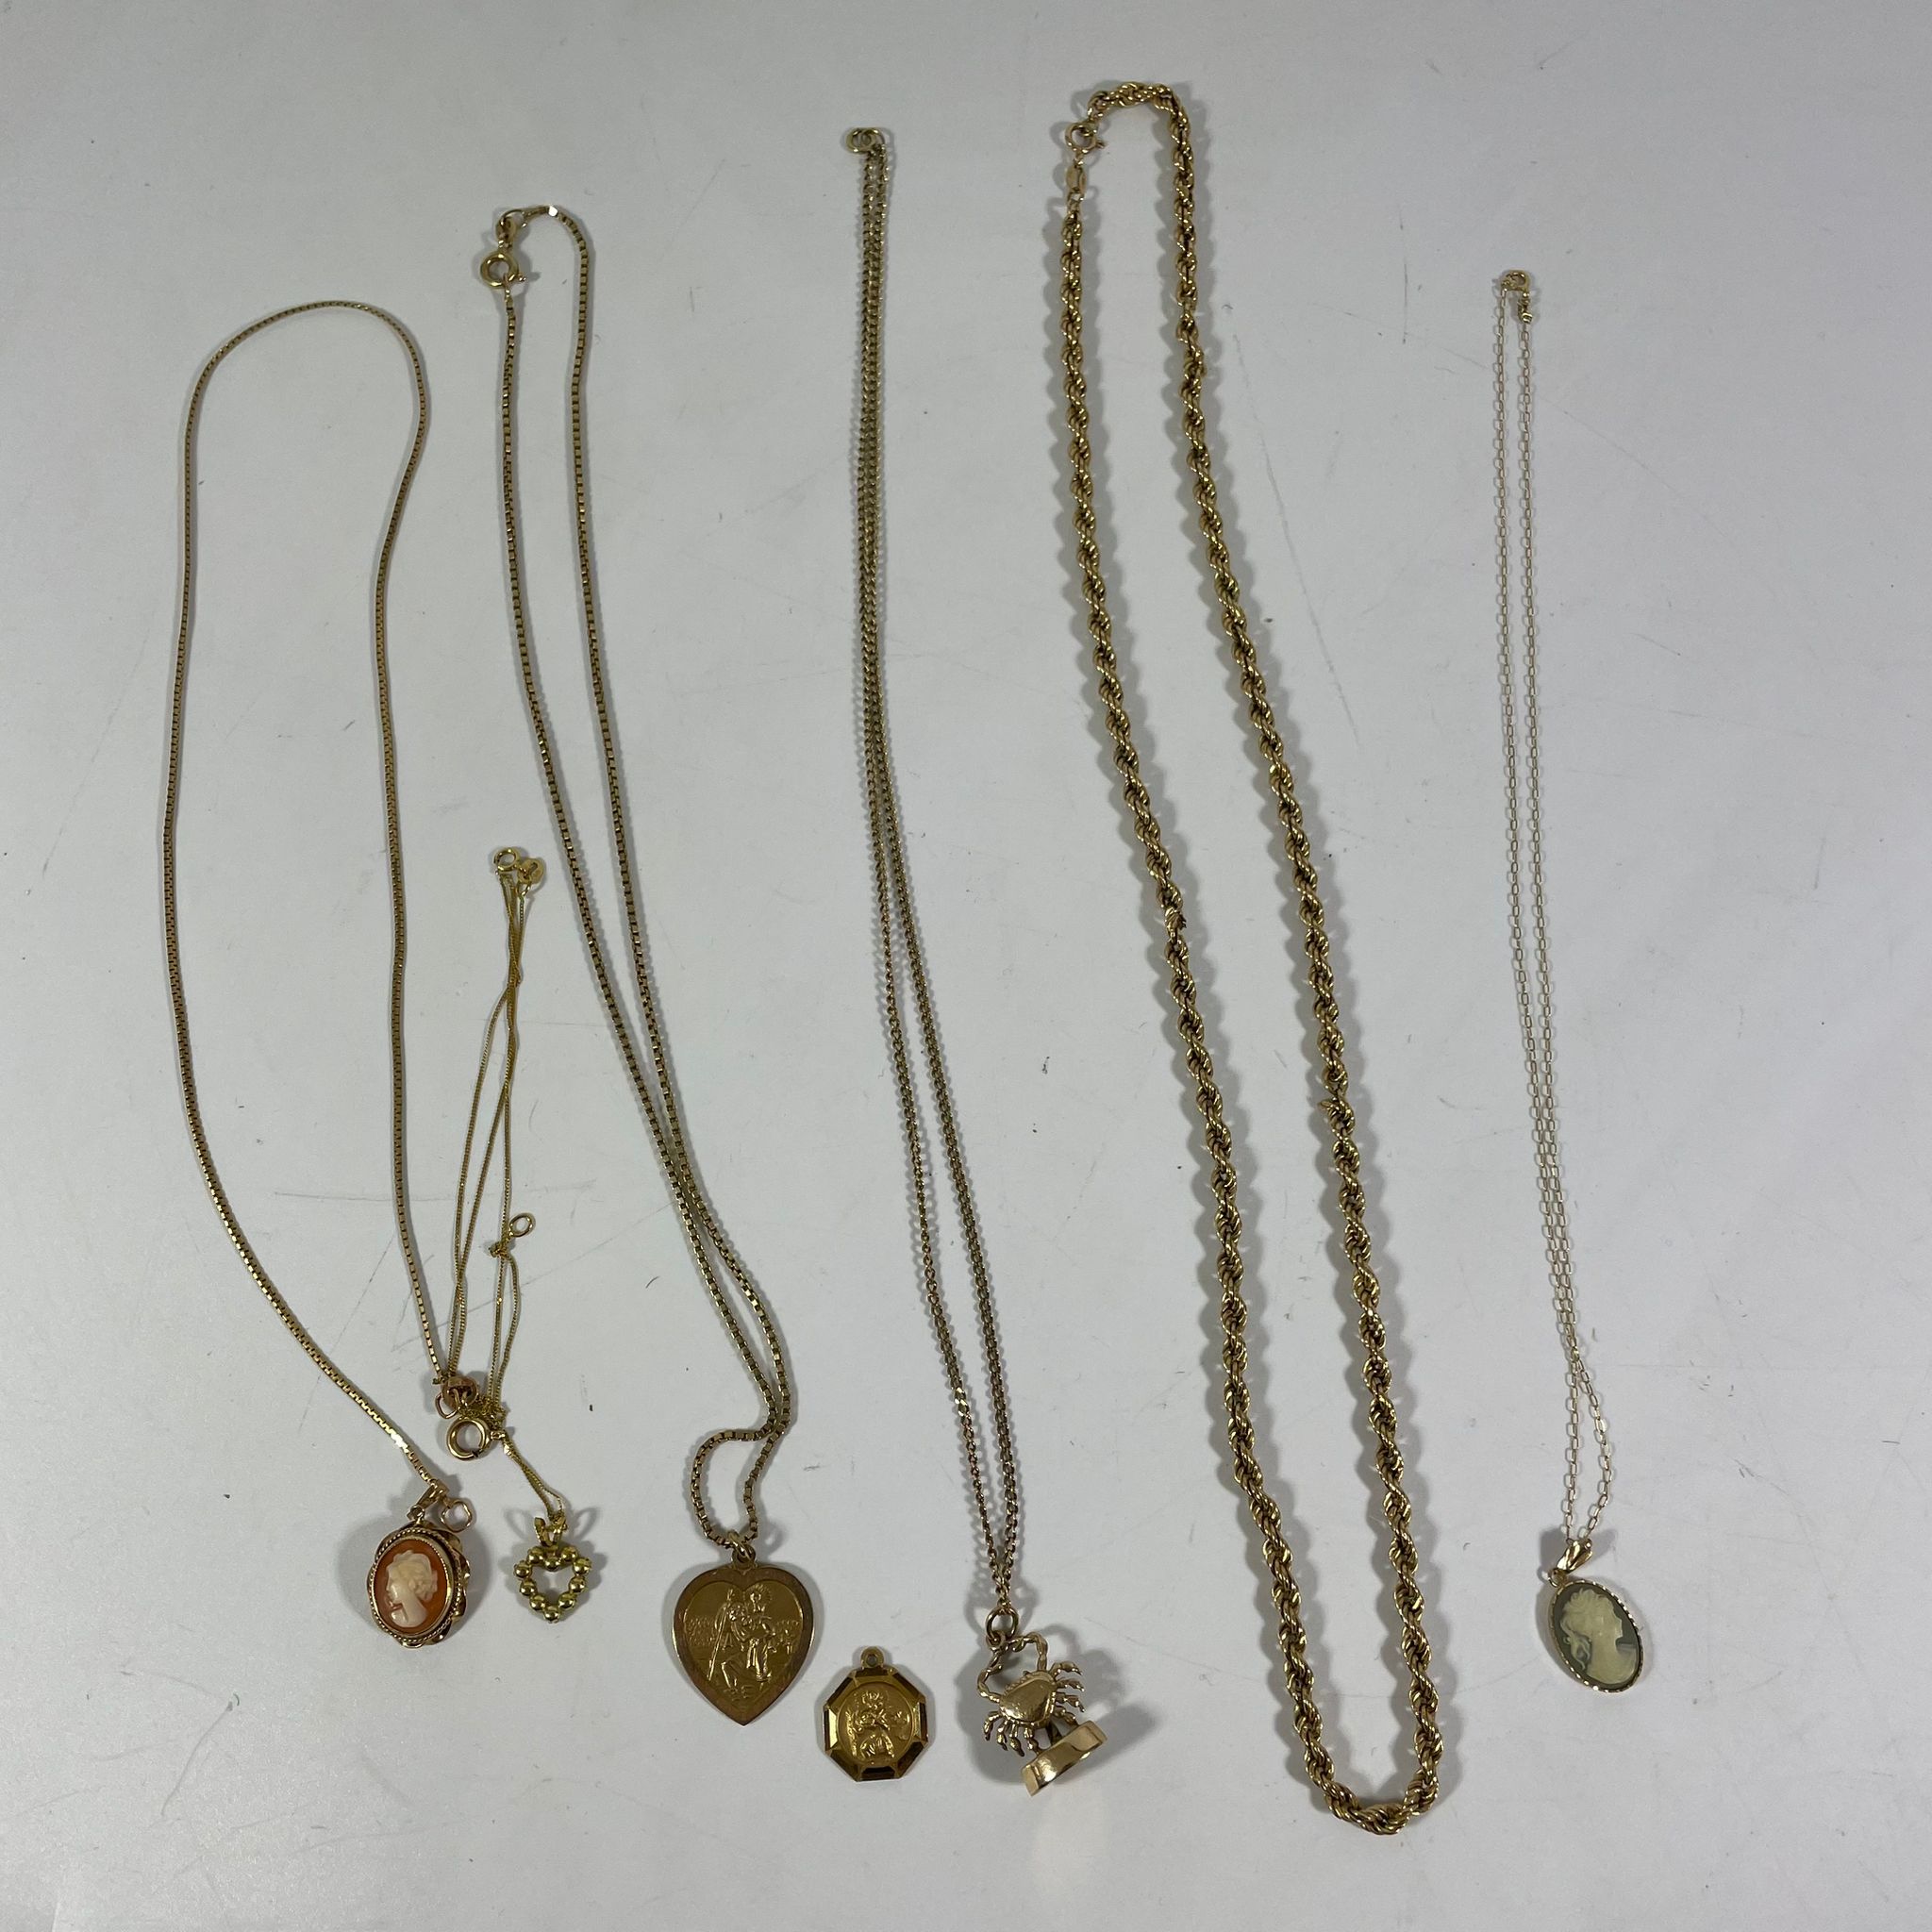 Five 9ct Chains, Four 9ct Pendants, a Gilt Chain and two Gilt Cameo Pendants. Total weight